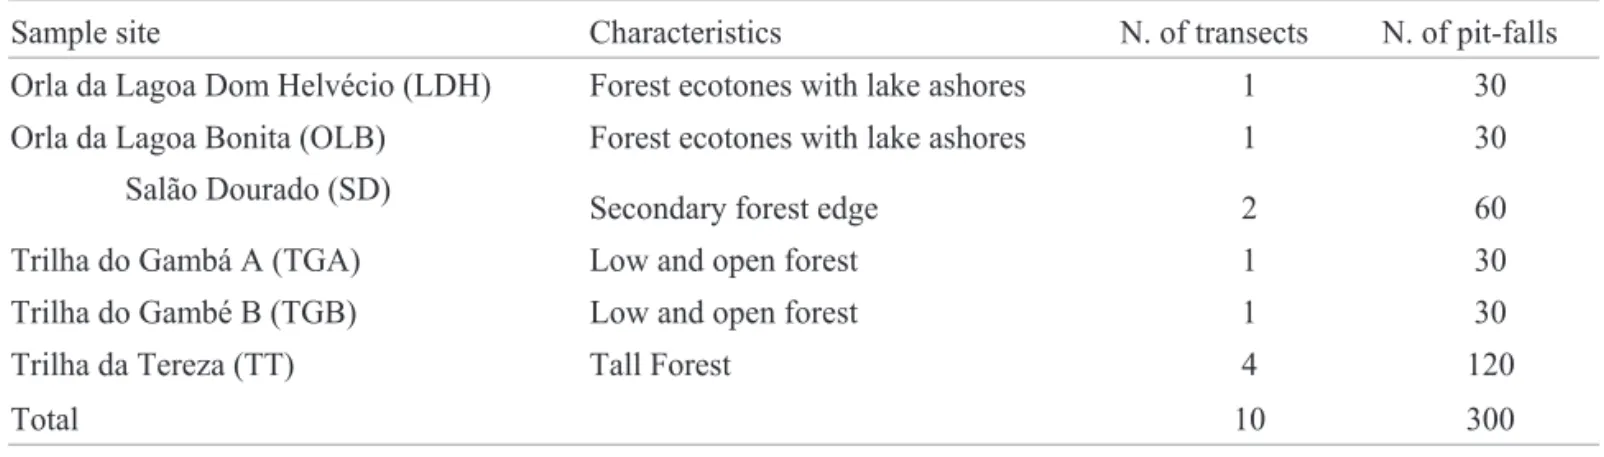 Table 1. Distribution of transects and pitfalls per sample site. This sample design was performed in both seasons.